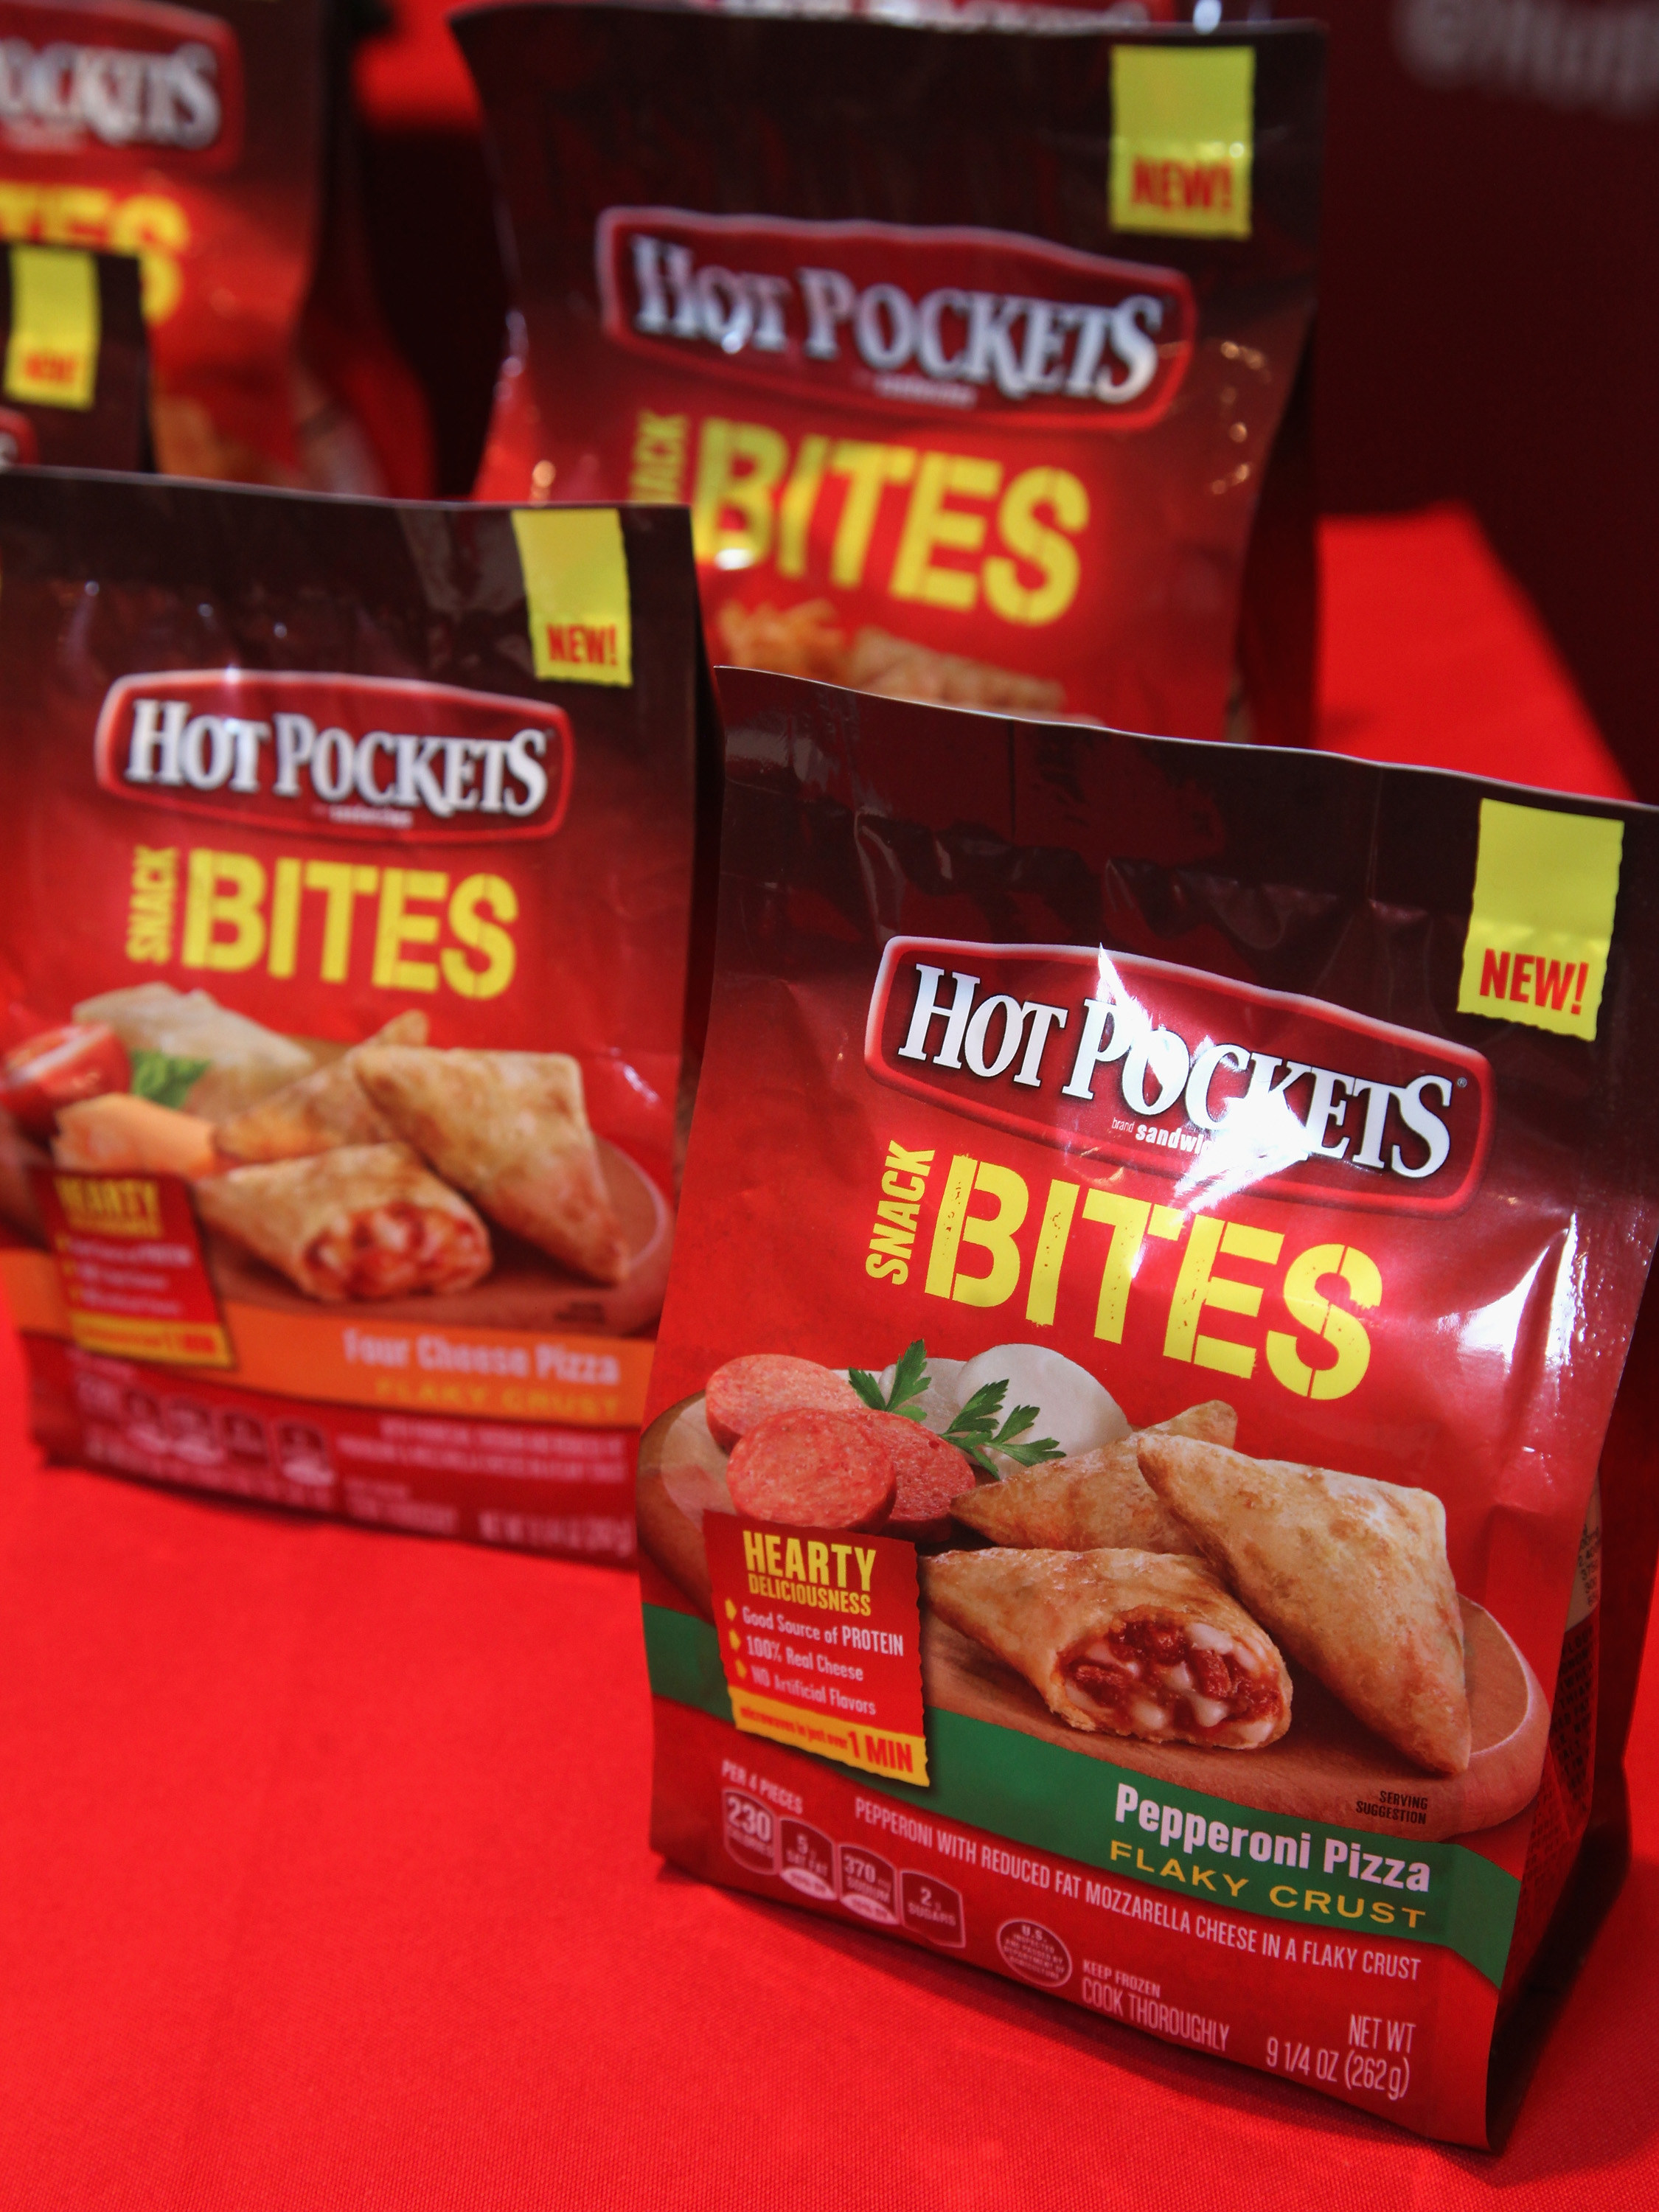 Three bags of Hot Pockets Snack Bites